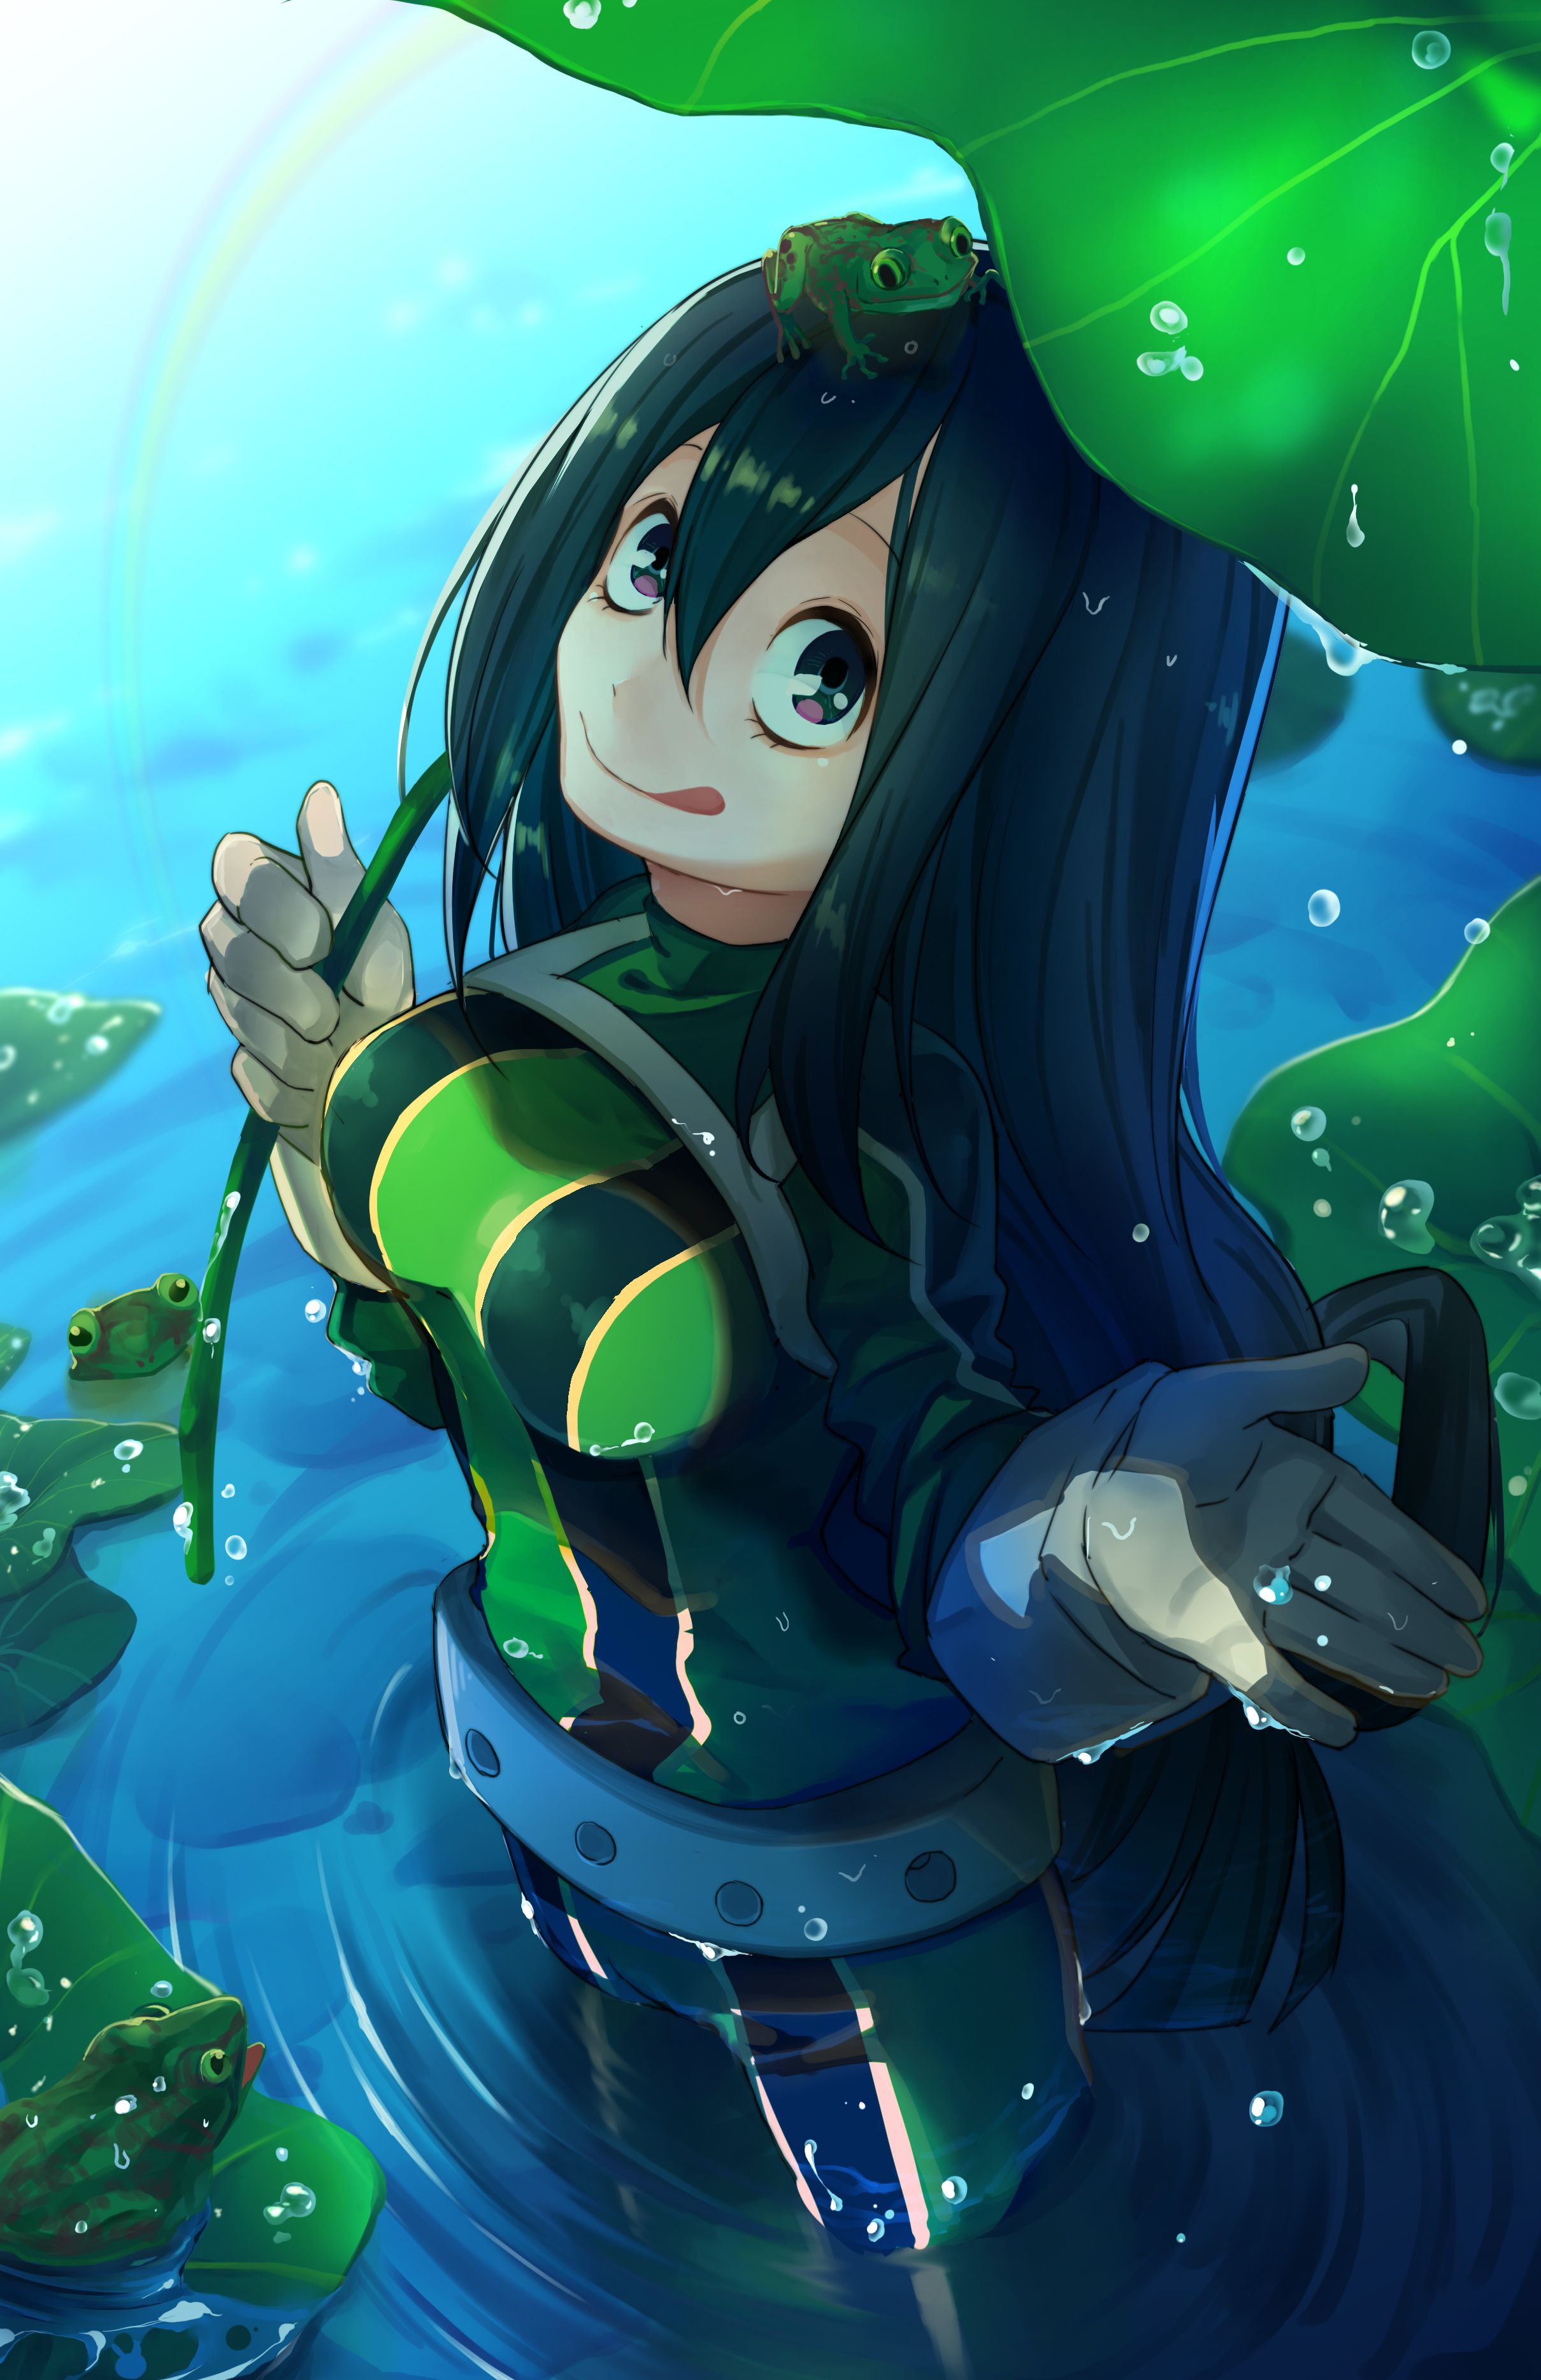 13 Tsuyu Asui Wallpapers for iPhone and Android by Robert Berry